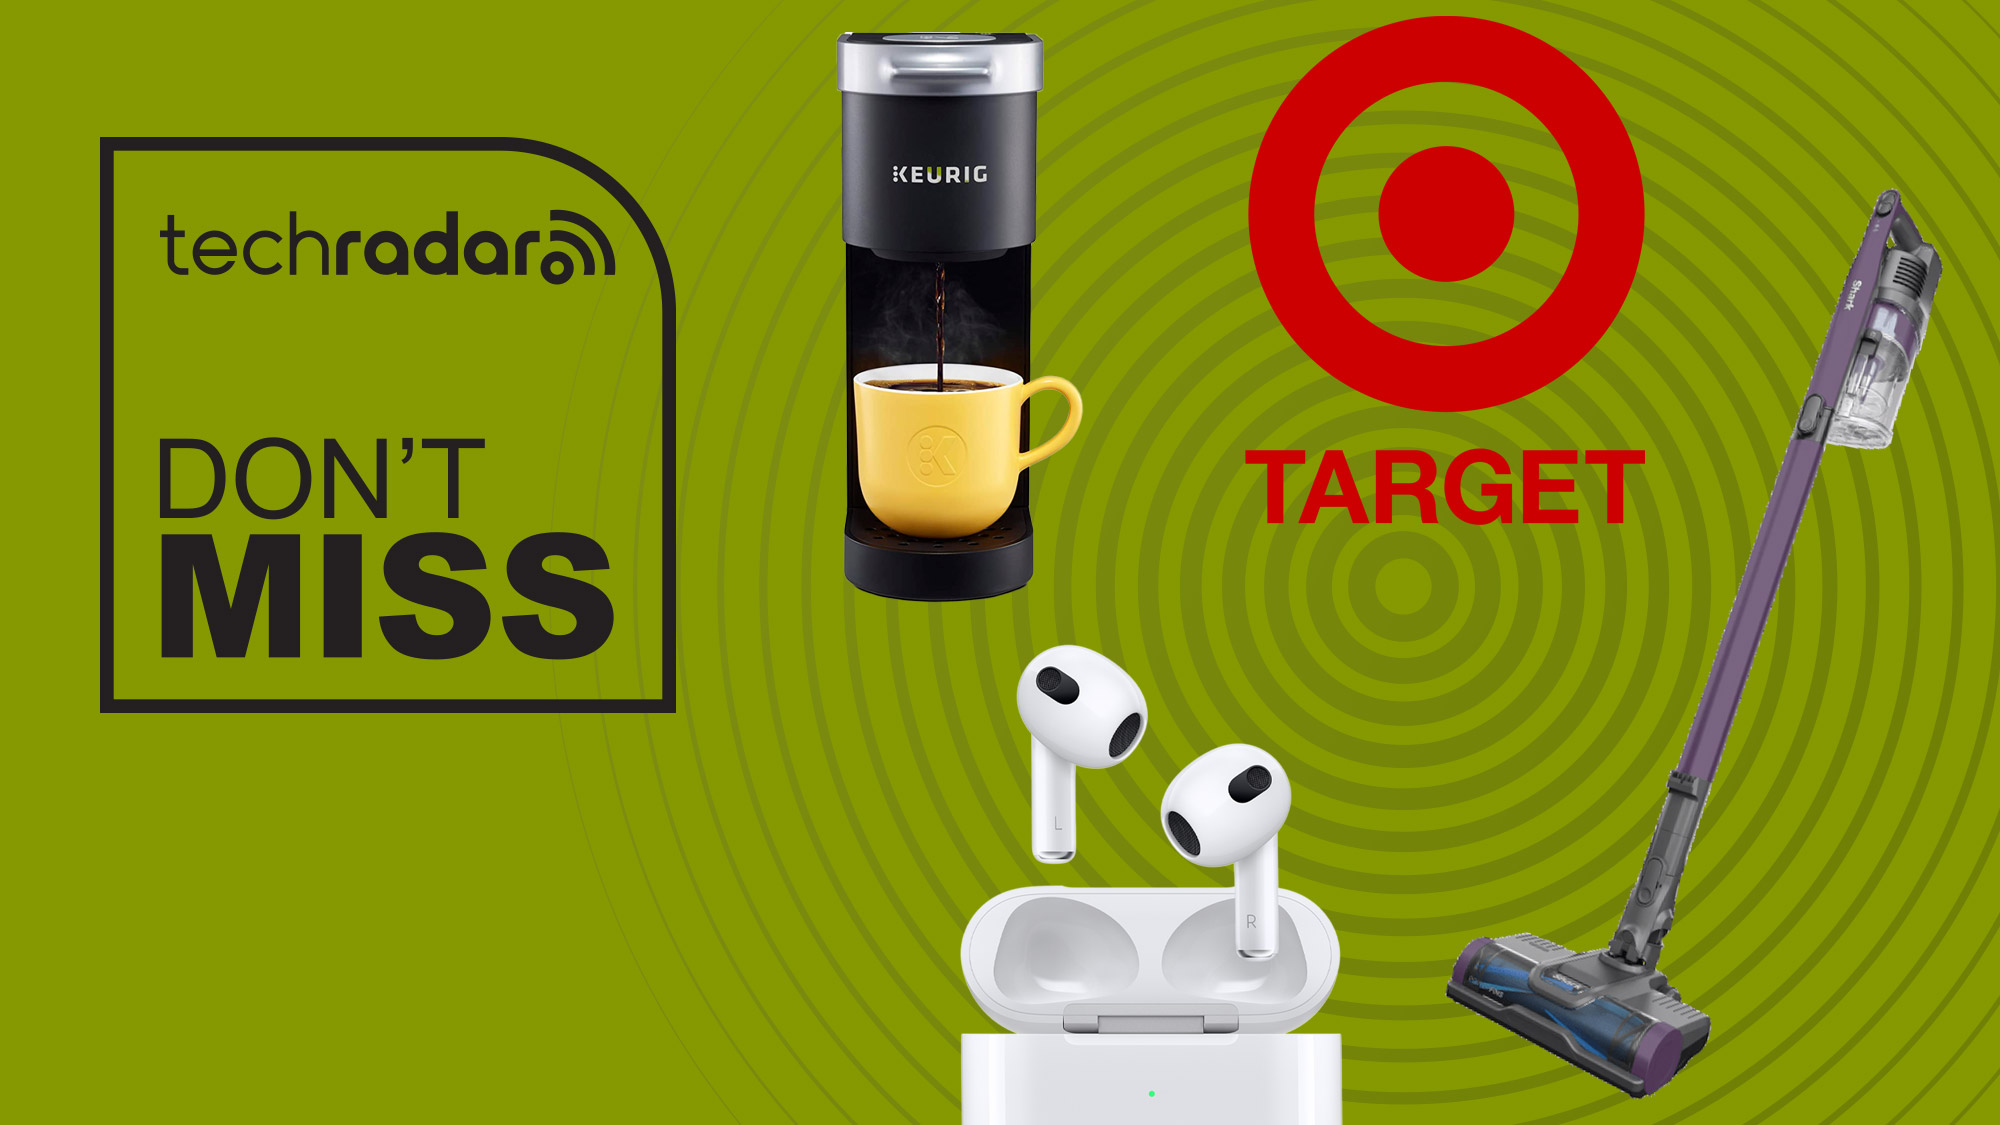 Target just launched its Presidents' Day sale - here are the 11 best deals I recommend